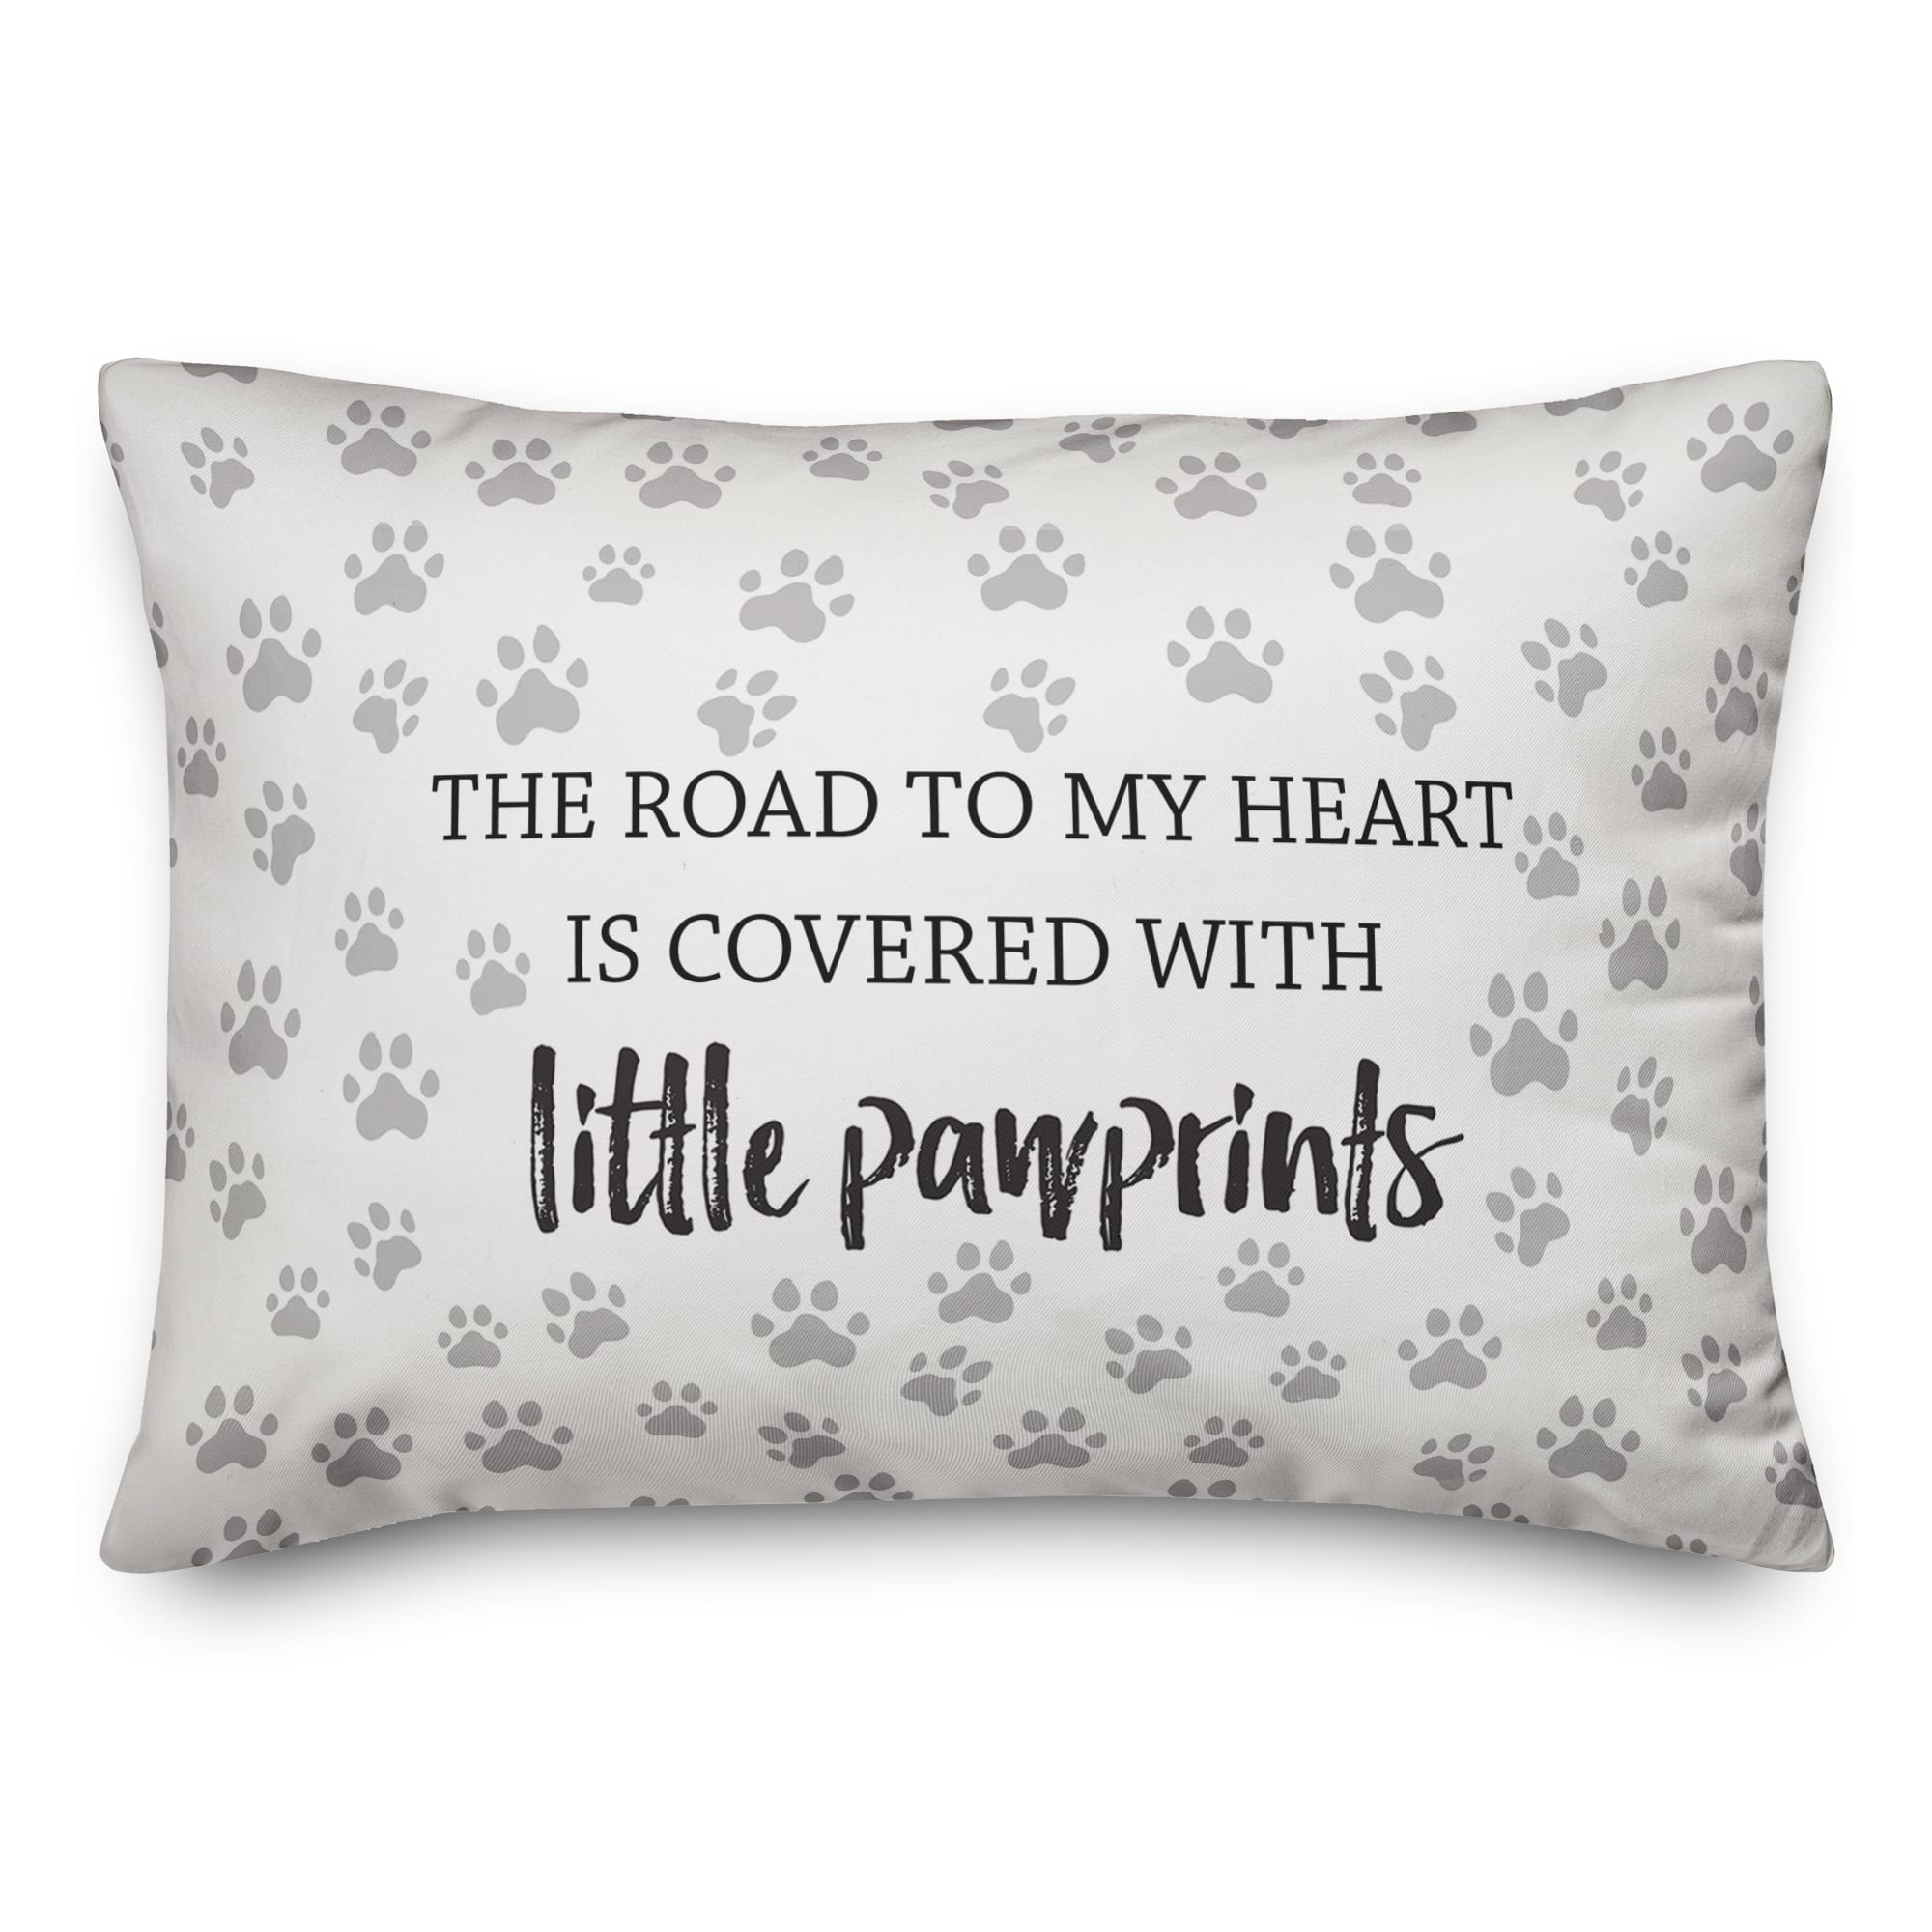 The Road to My Heart Is Covered with Little Pawprints Throw Pillow